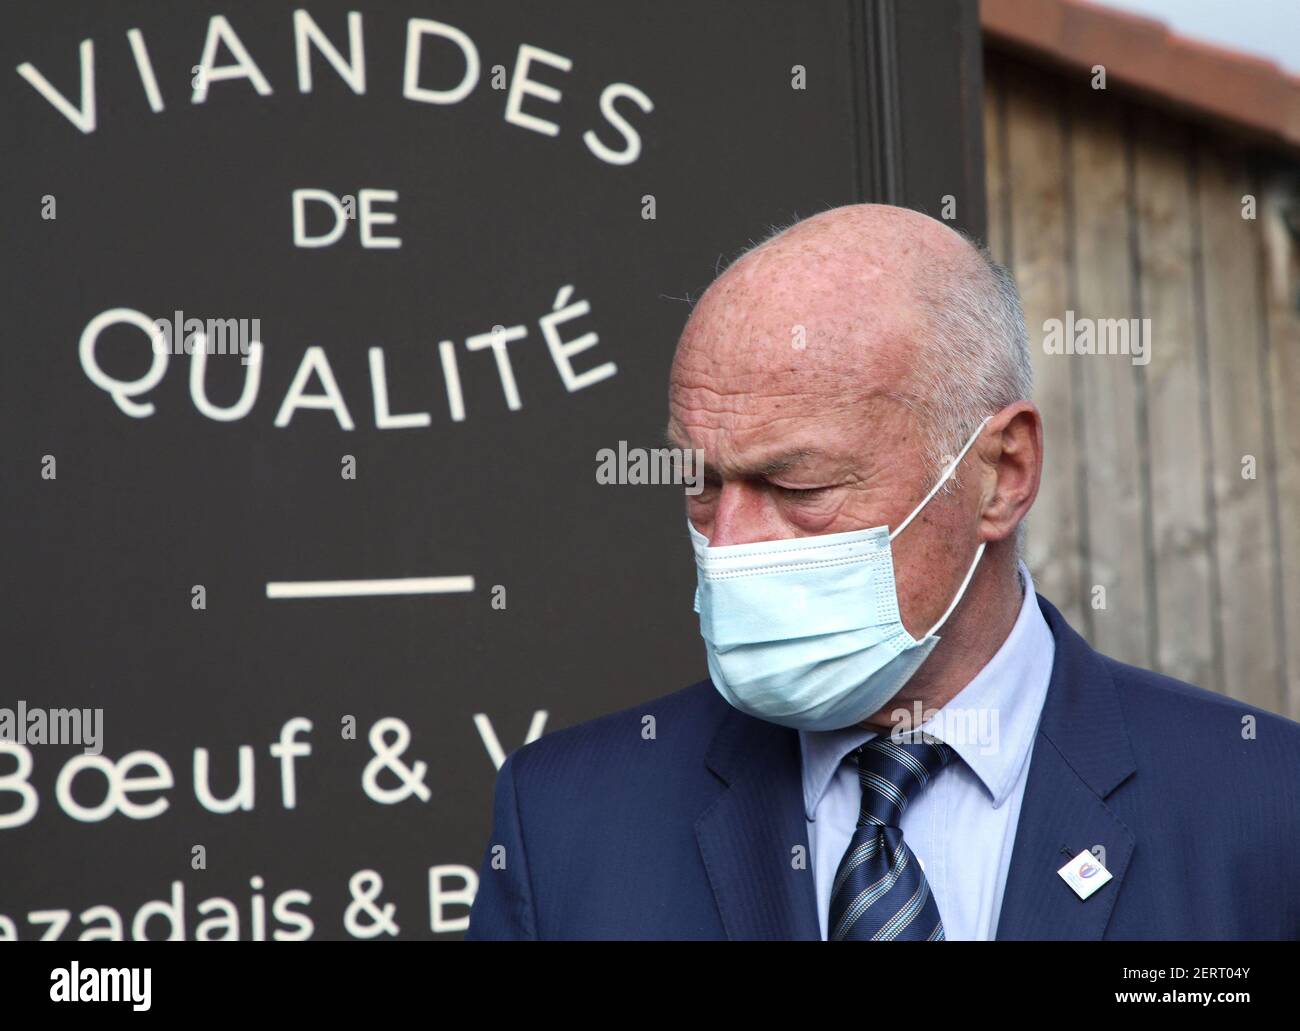 The president of the Nouvelle-Aquitaine region Alain Rousset visiting the La Valette estate of Arnaud Bourgeois, Dordogne. This organic farm received support from the Regional Council as part of the Competitiveness and Adaptation Plan for agricultural holdings. Saint Félix de Villadeix, France on February 26, 2021. Photo by Simonet D/ANDBZ/ABACAPRESS.COM Stock Photo